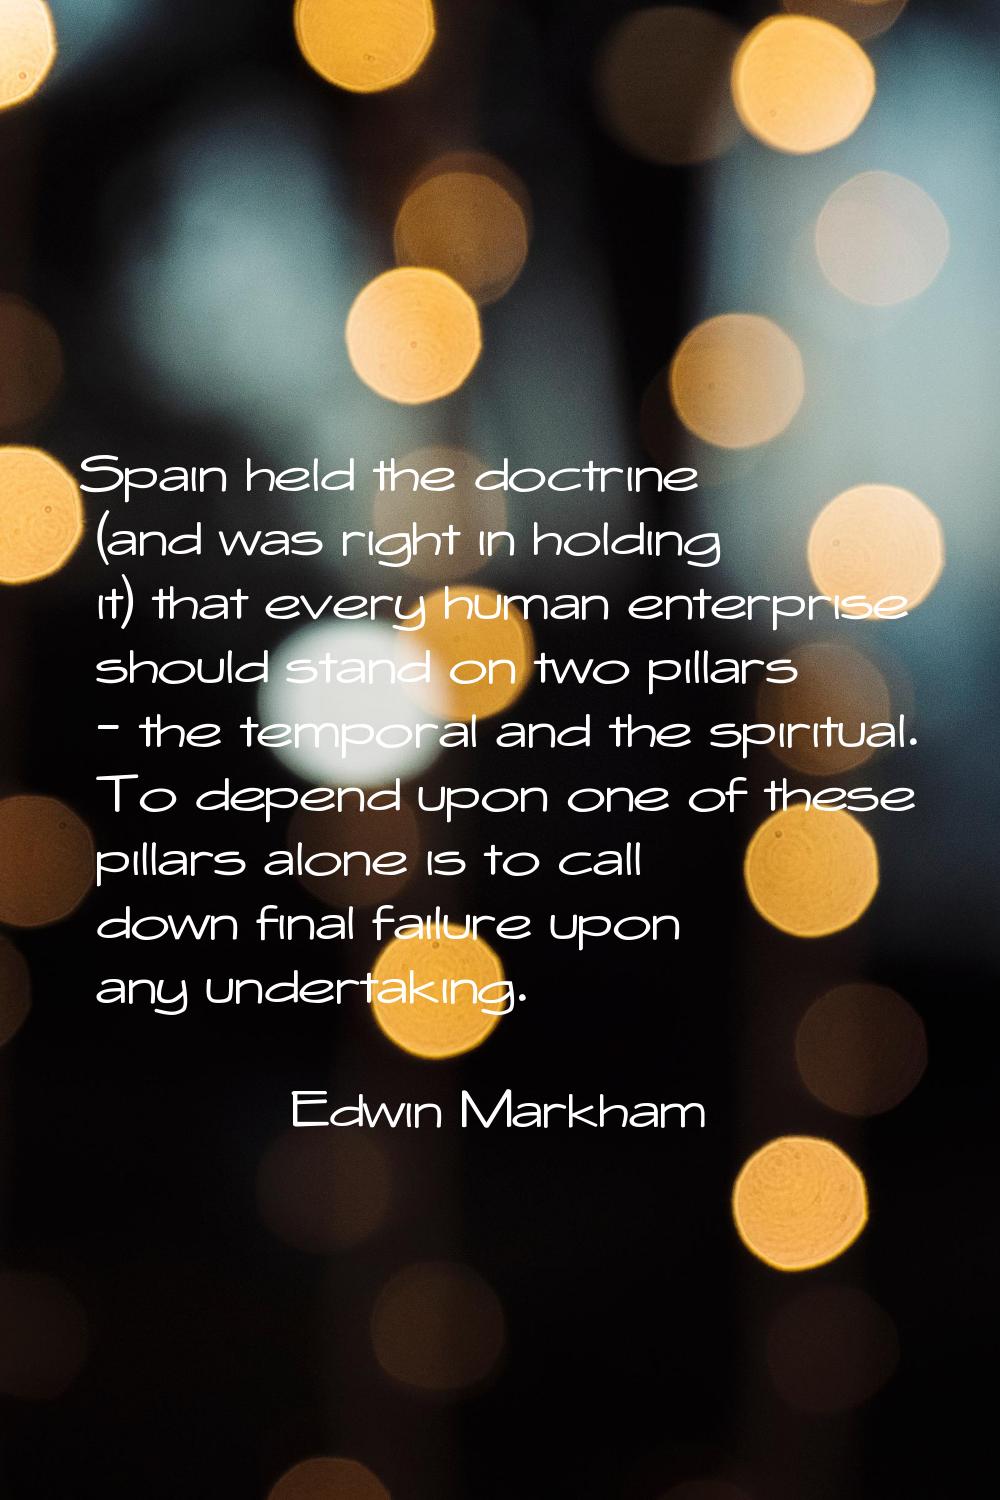 Spain held the doctrine (and was right in holding it) that every human enterprise should stand on t